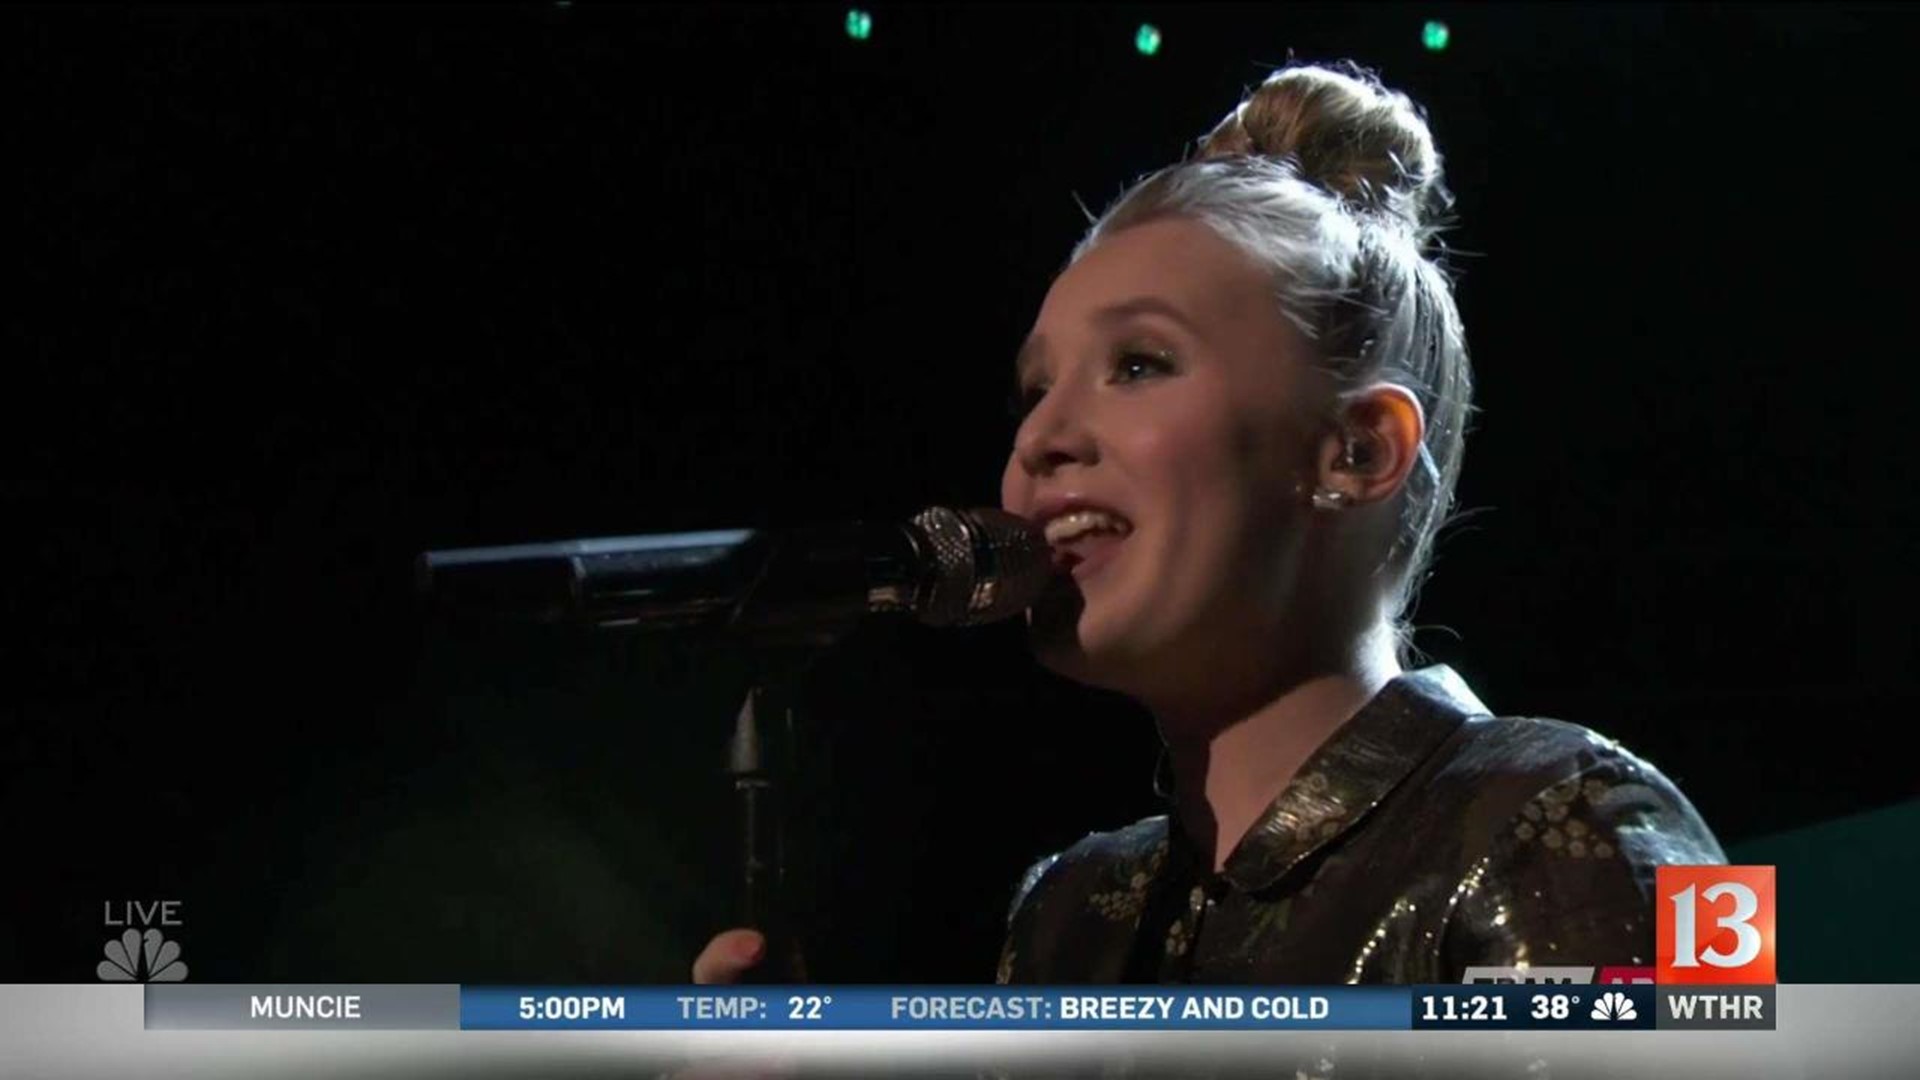 Addison Agen performs Monday on The Voice